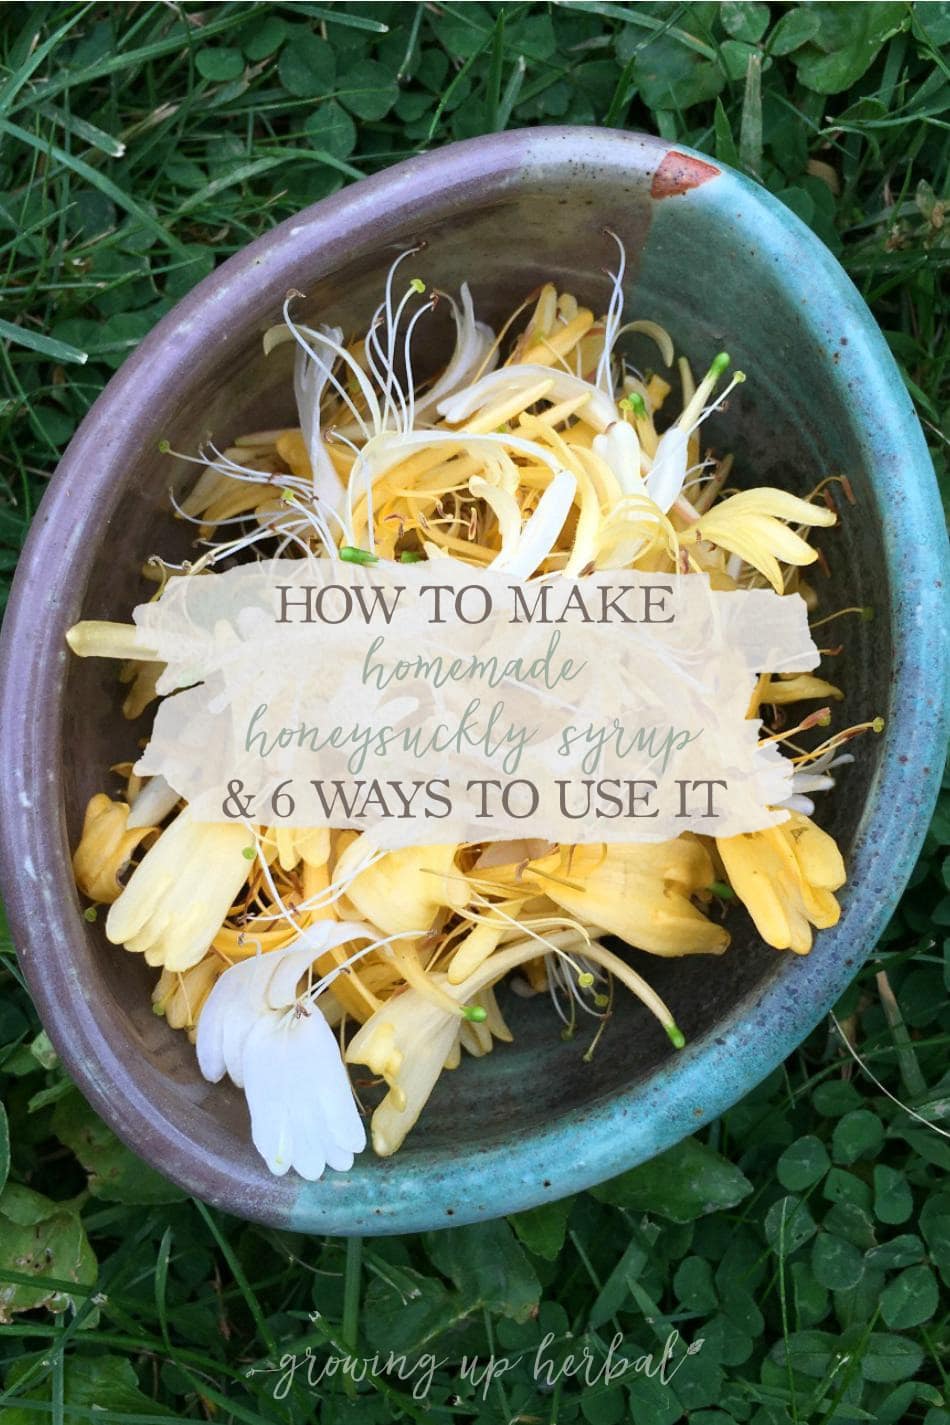 Homemade Honeysuckle Syrup & 6 Ways To Use It | Growing Up Herbal | Learn how to make a simple homemade honeysuckle syrup as well as 6 ways to use it! You've not experienced summer until you've had honeysuckle syrup!